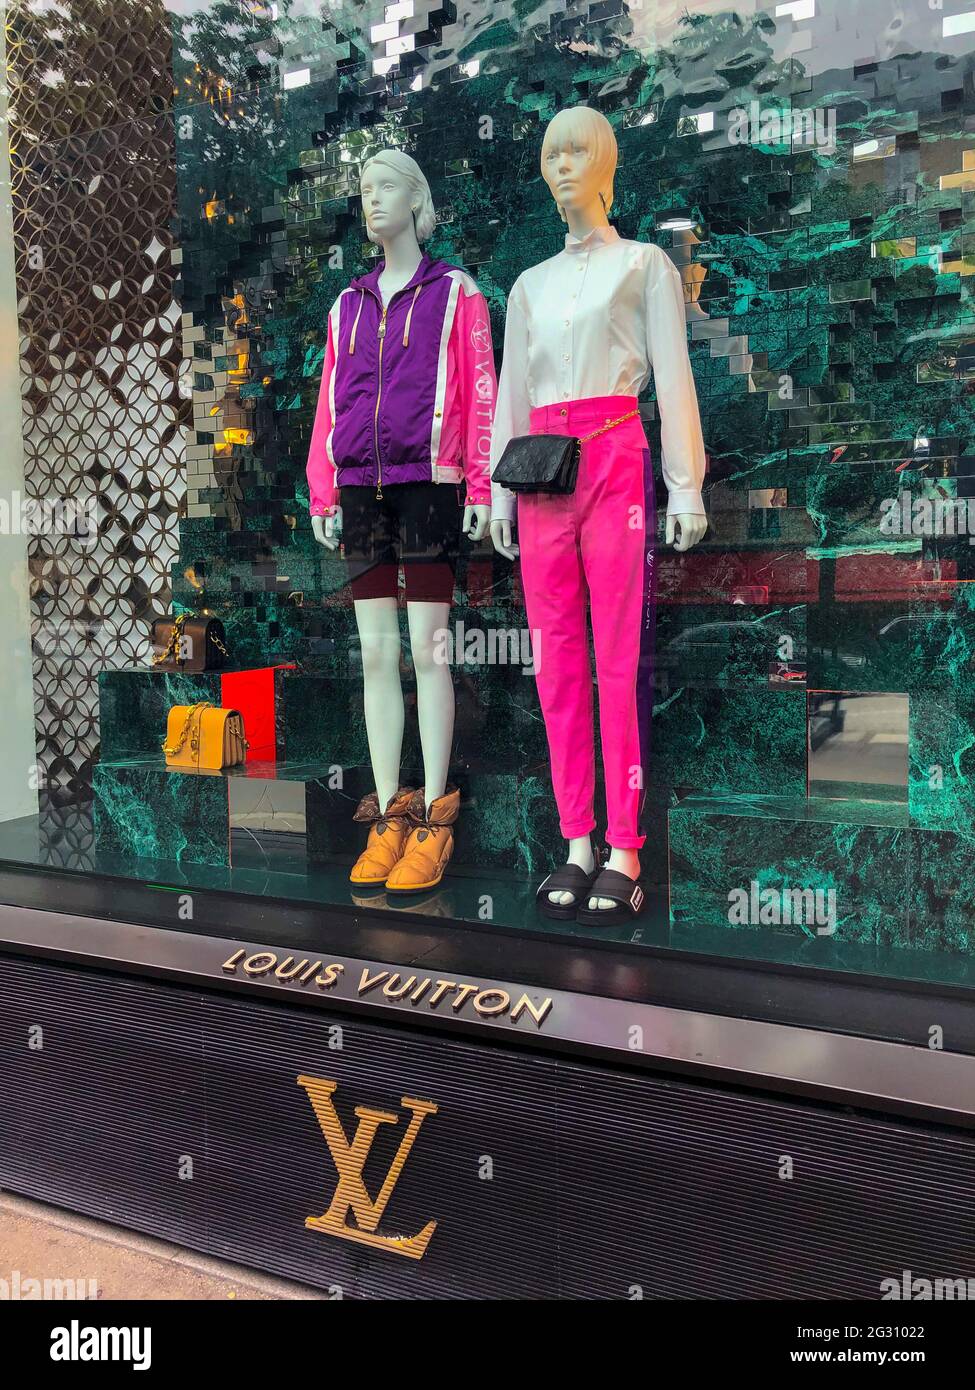 louis vuitton window display with flowers  Retail design display, Window  display design, Visual merchandising